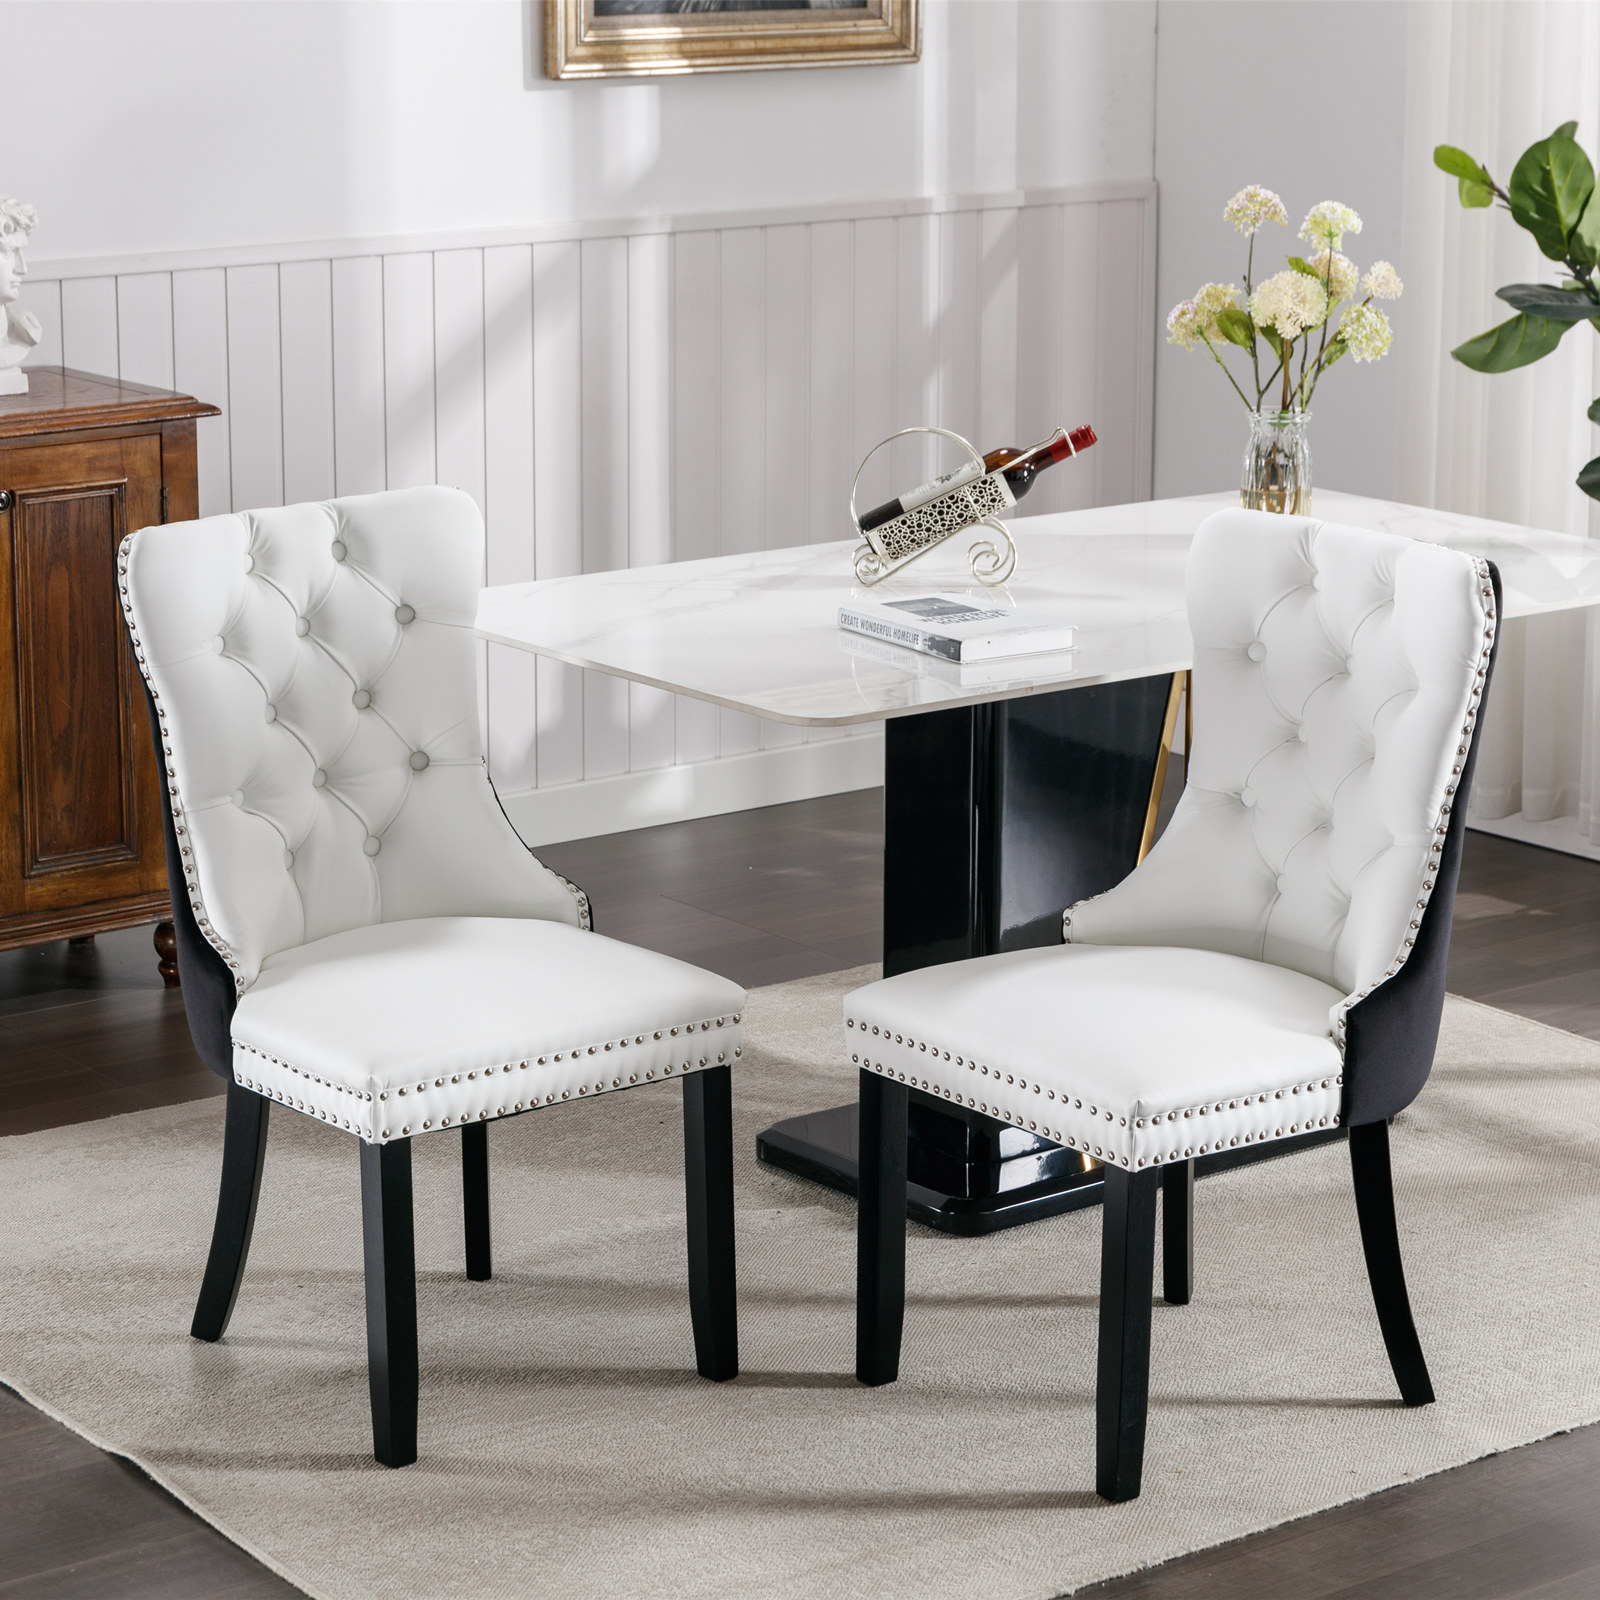 Montary Modern Tufted Solid Wood Contemporary PU and Velvet Upholstered Dining Chair with Wood Legs Nailhead Trim Set of 2